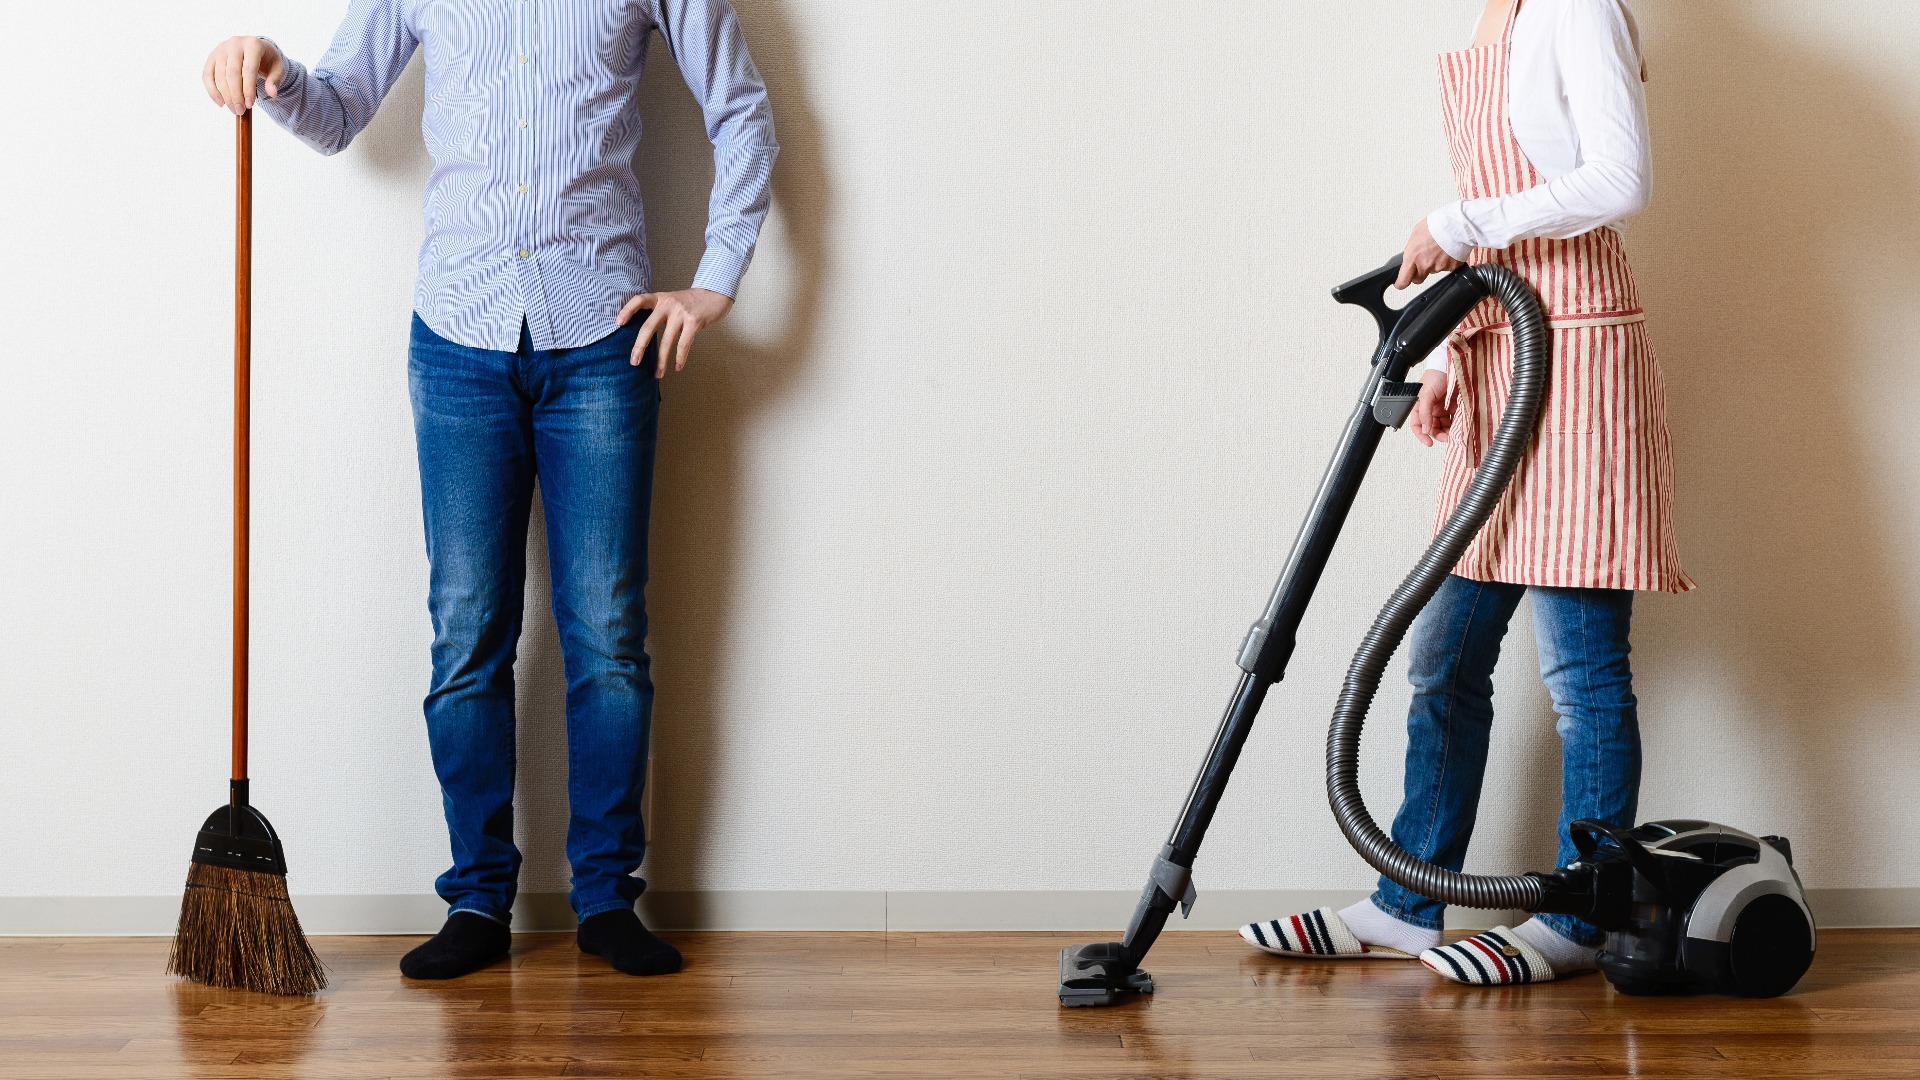 A man holding a broom and a woman holding a vaccum.